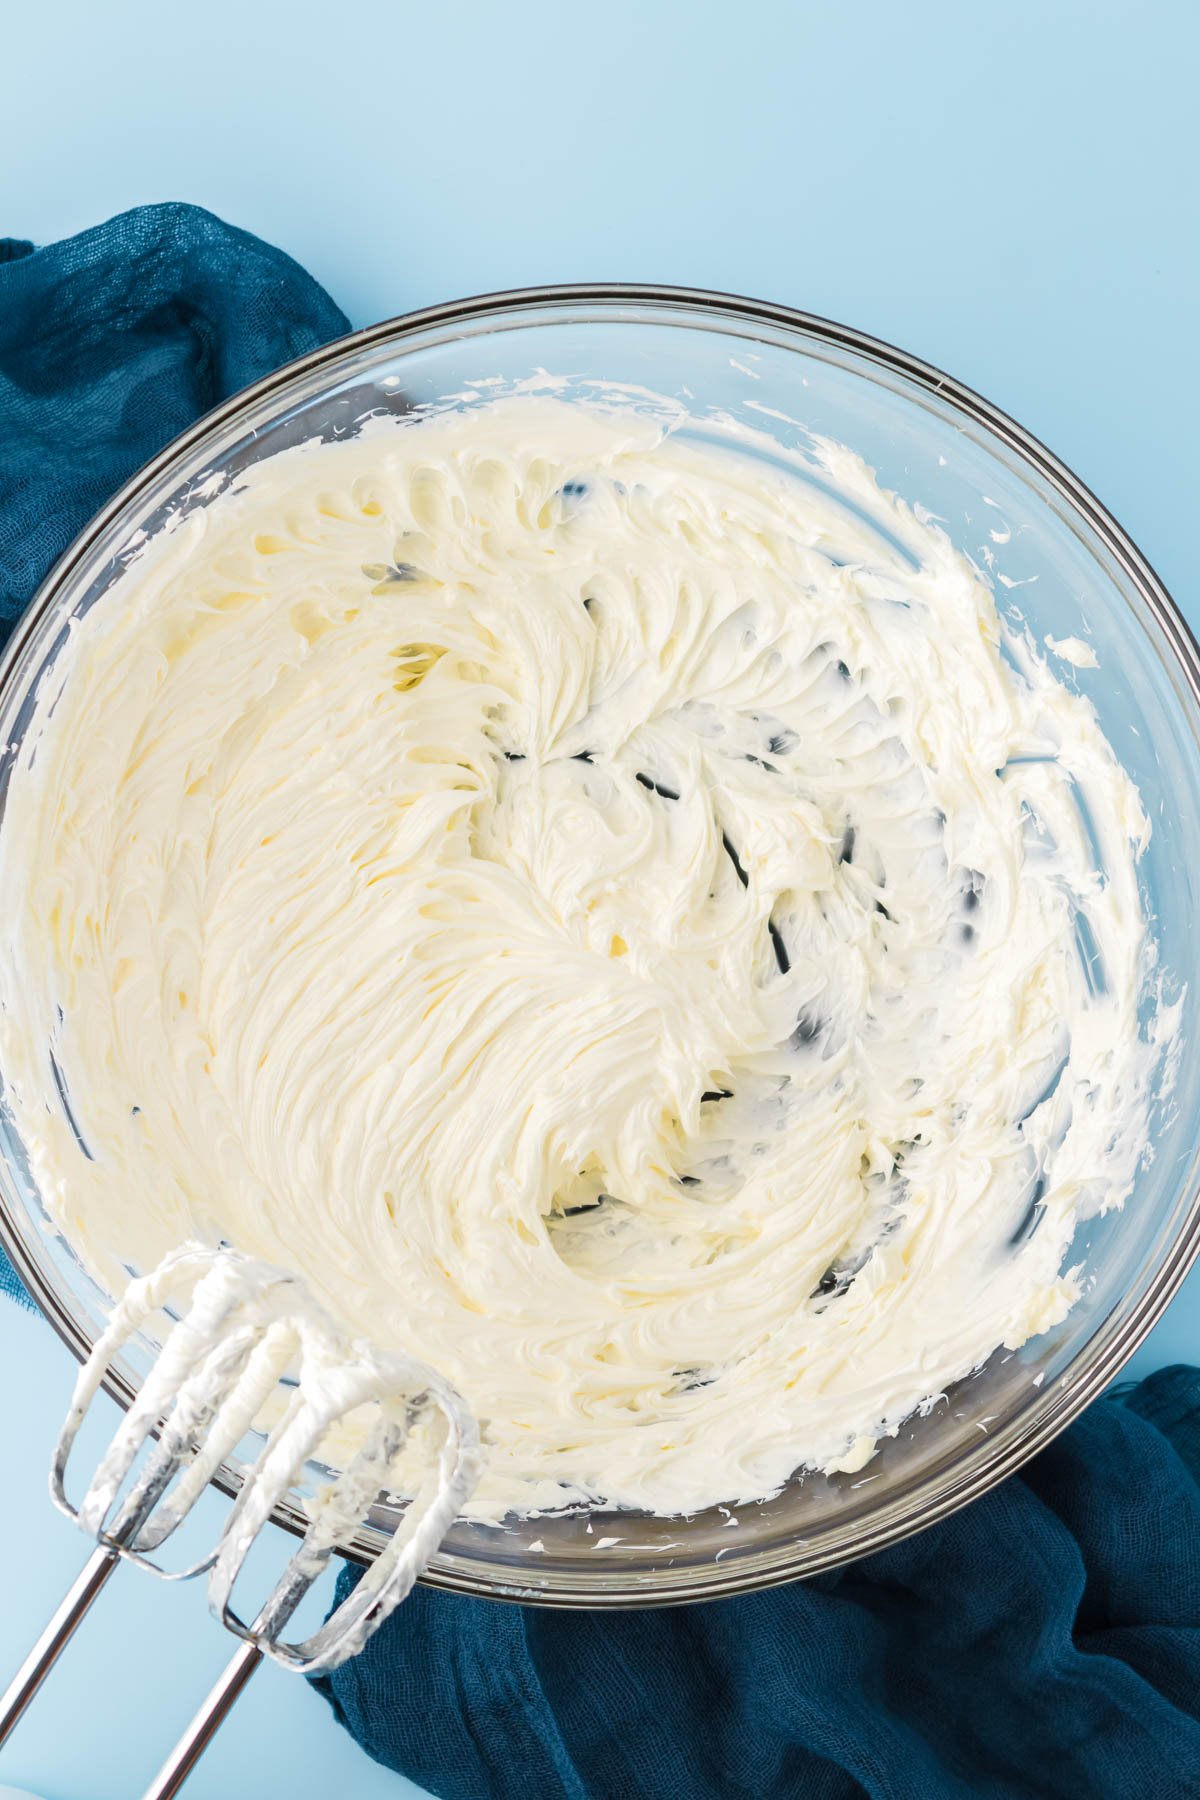 Creamed butter in a large glass bowl.